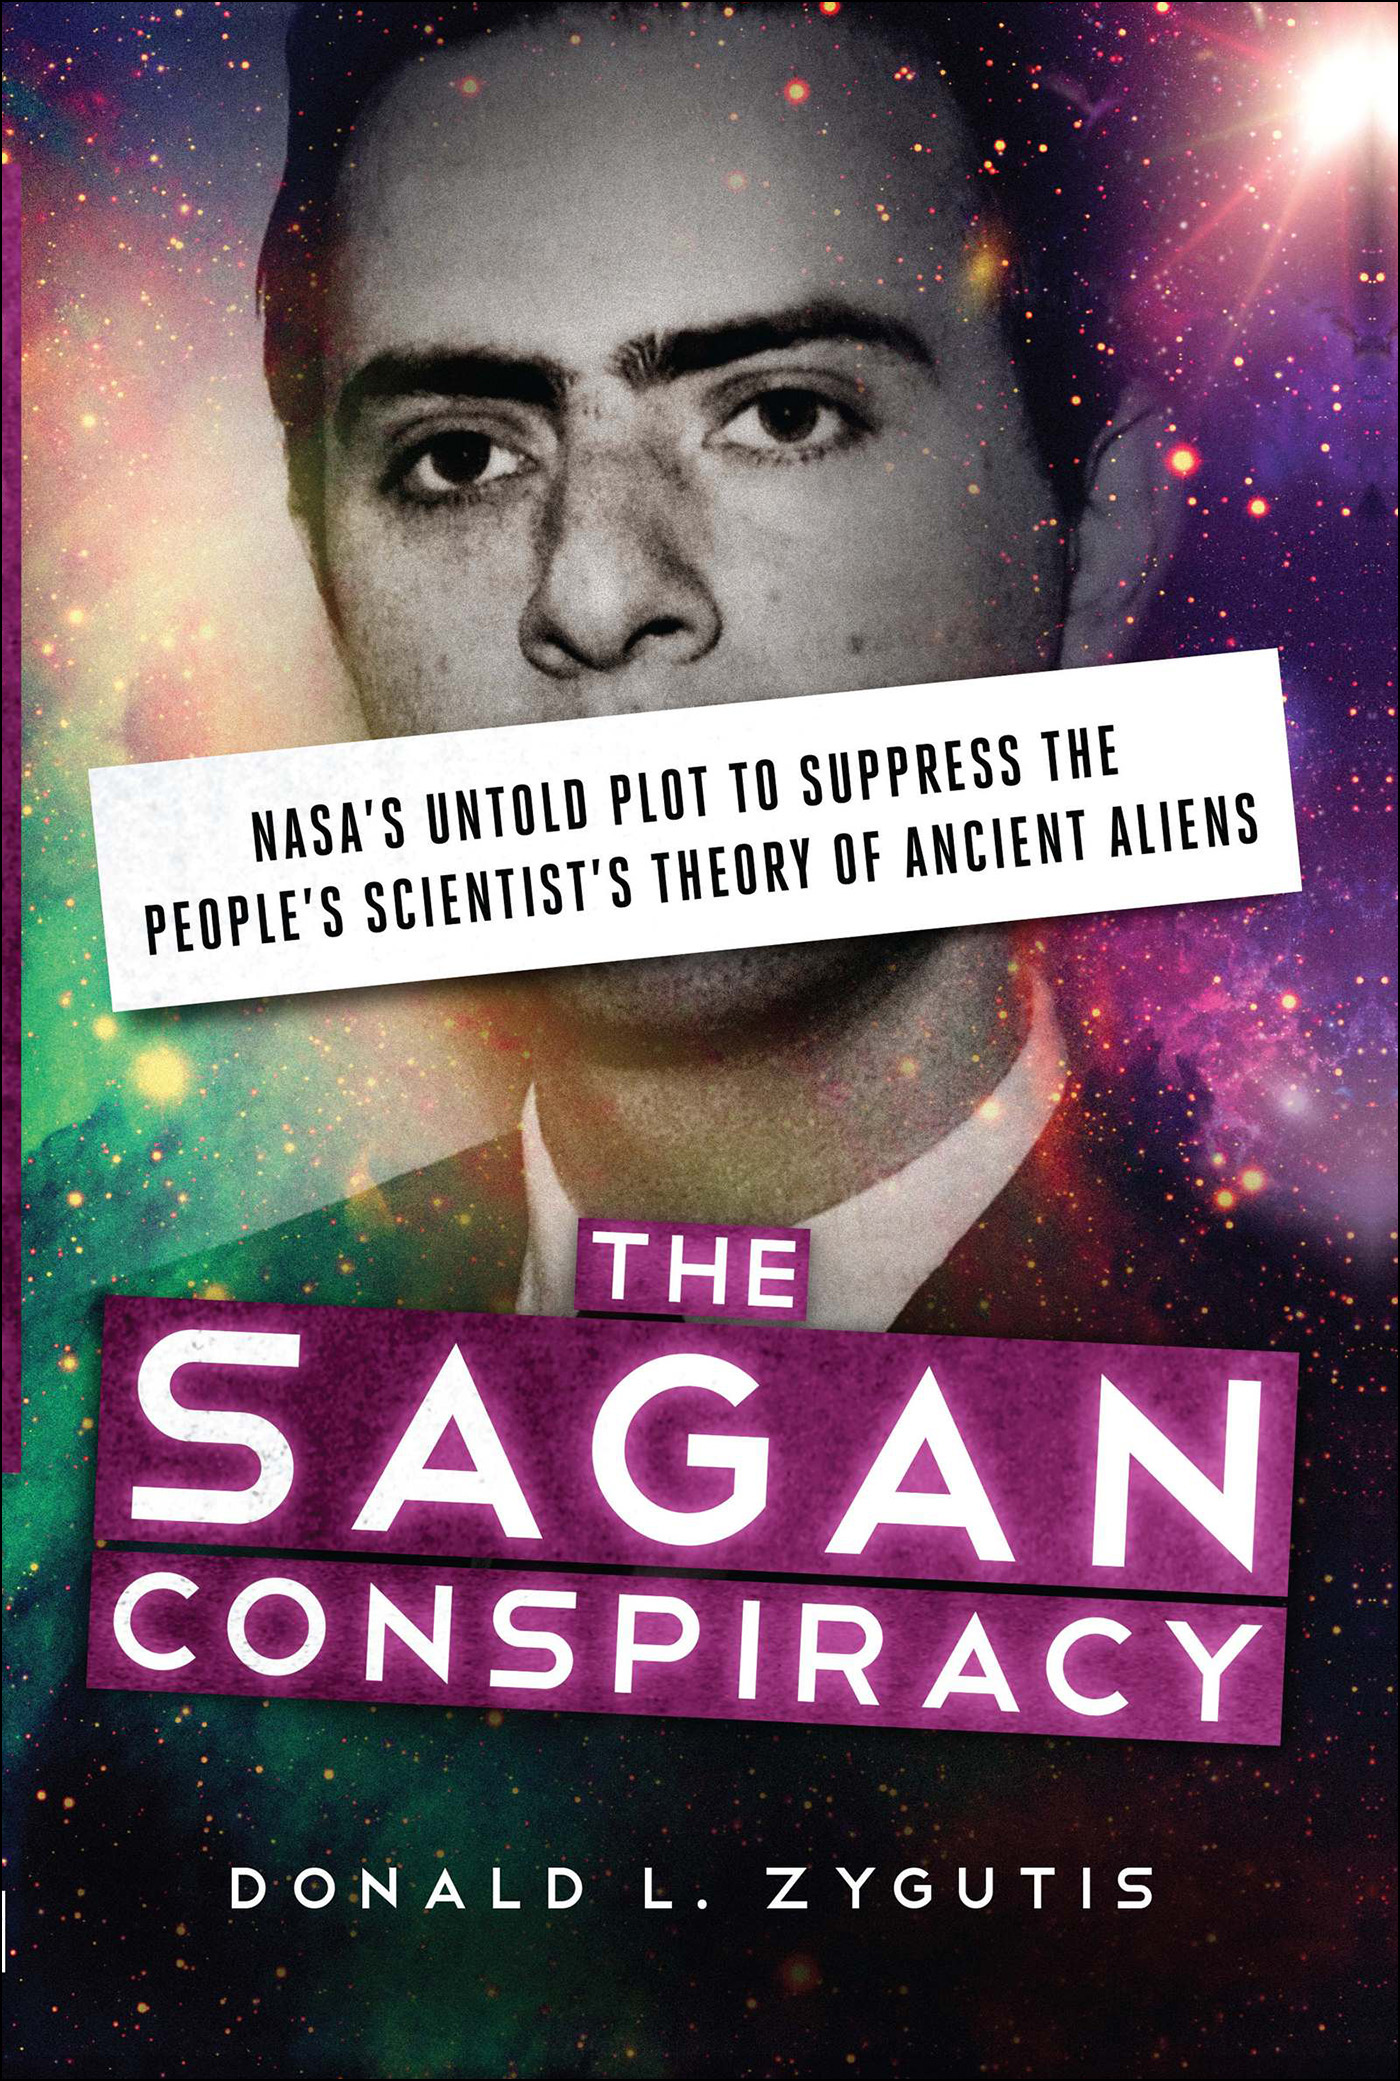 The Sagan Conspiracy: NASA's Untold Plot to Suppress the People's Scientist's Theory of Ancient Aliens